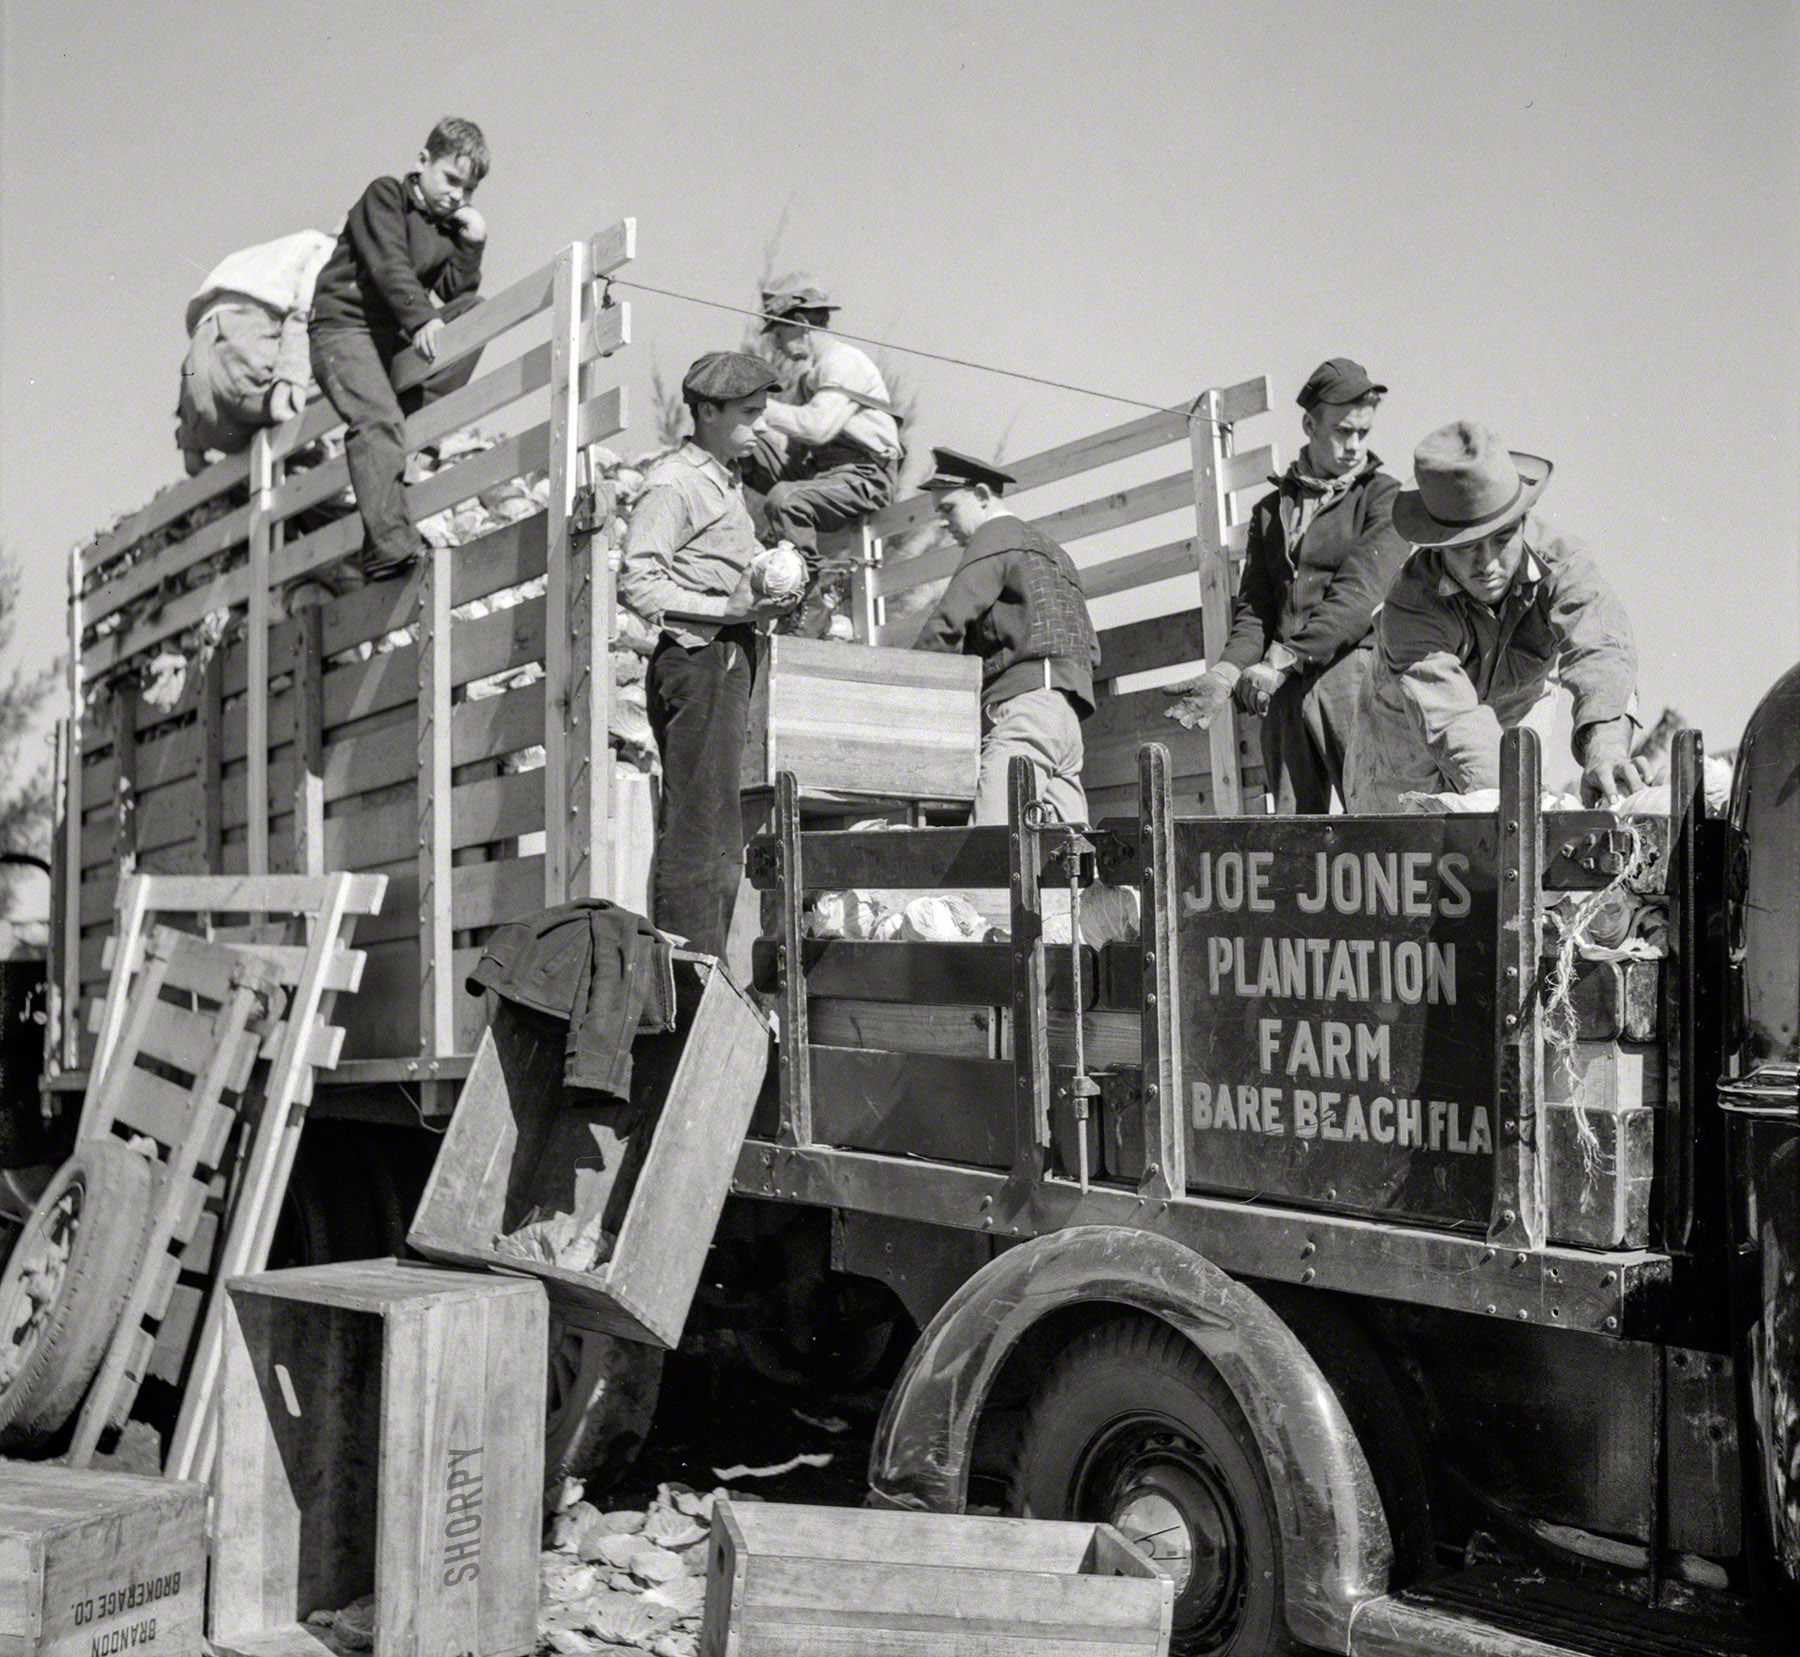 January 1939. "Packing cabbages in truck to go to market, from small truck farm of man from North Carolina. Near Belle Glade, Florida." Bare Beach was an agricultural outpost on the southern shore of Lake Okeechobee. Photo by Marion Post Wolcott for the Farm Security Administration. View full size.